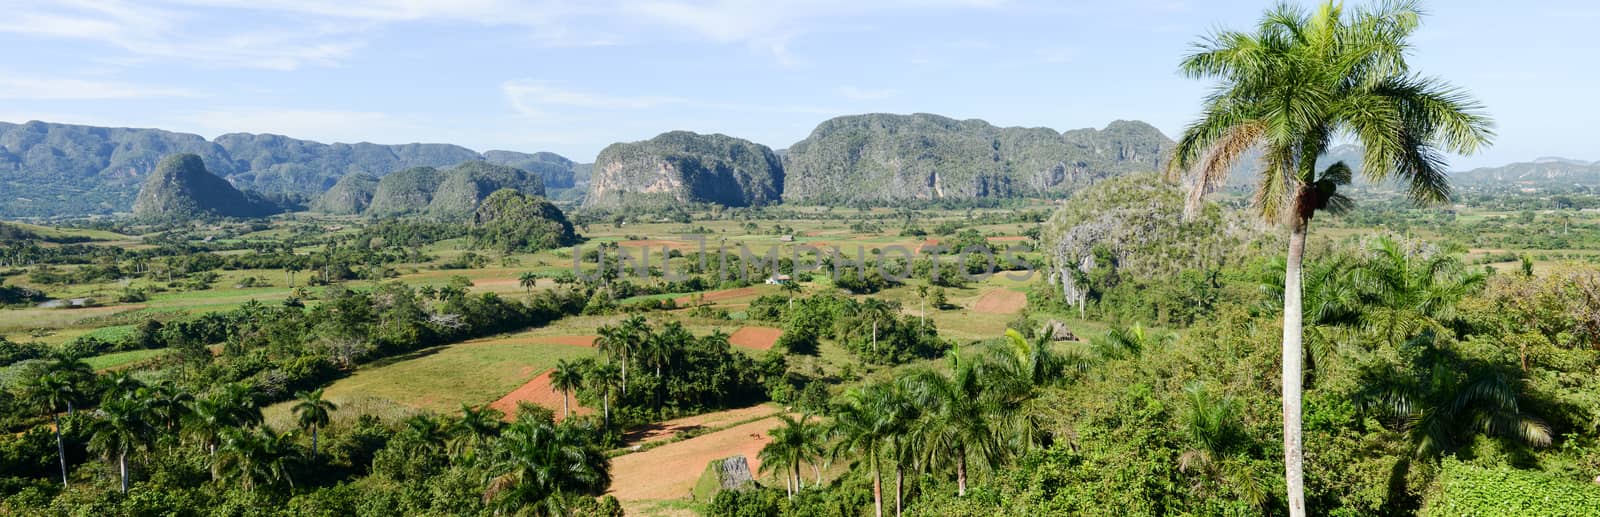 Panoramic view over landscape with mogotes in Vinales Valley by Fotoember